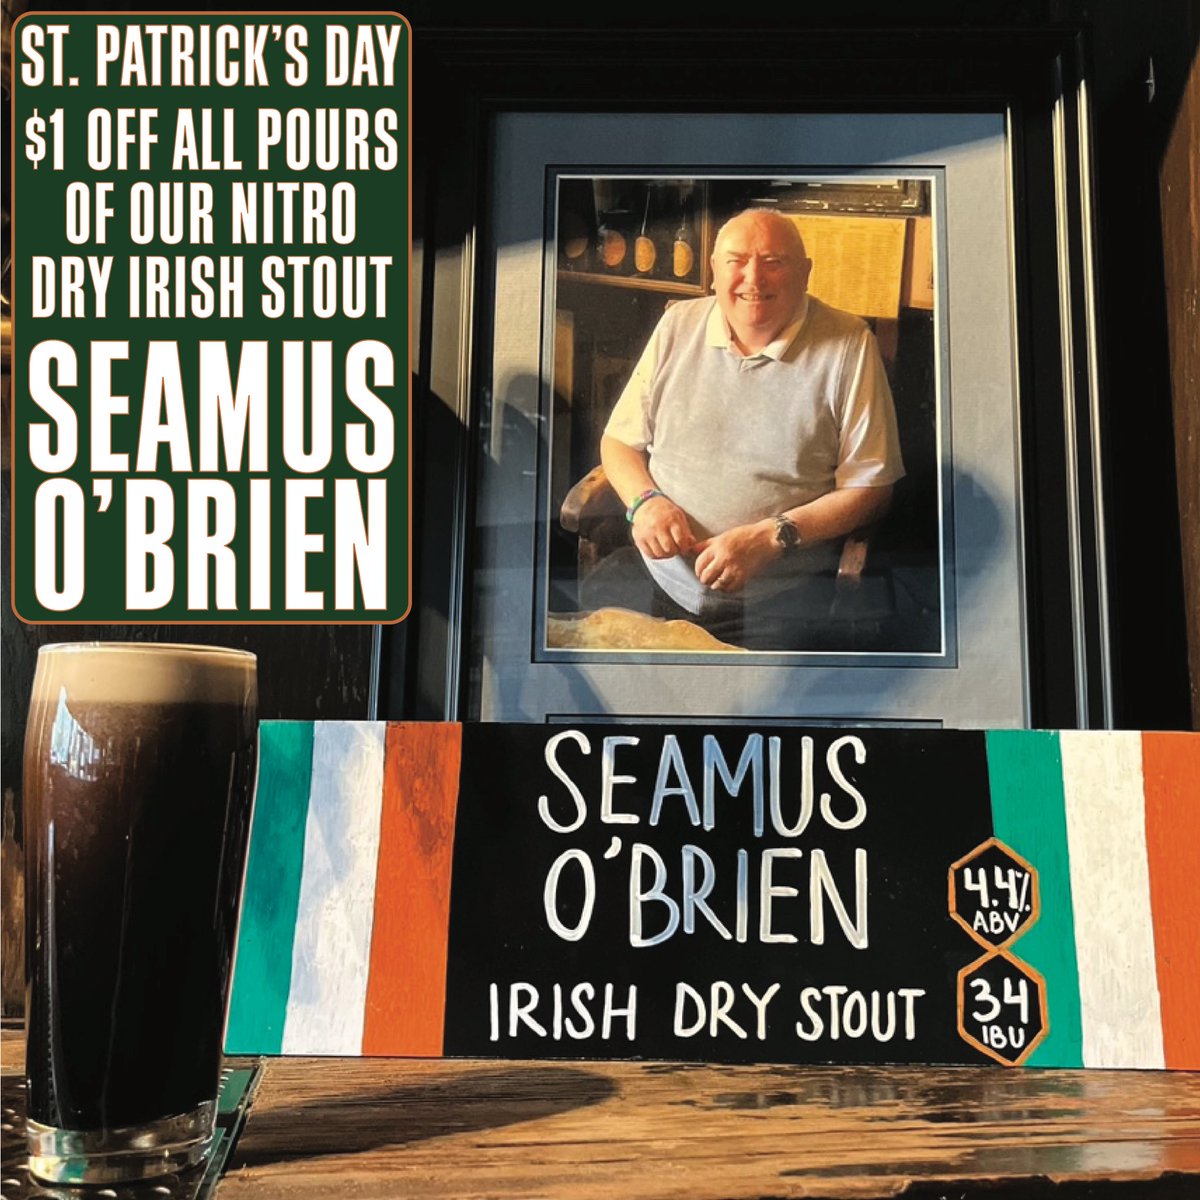 Cheers Seamus - this Friday’s for you! 💚

It is hard to imagine someone more Irish than our good friend Seamus O’Brien, so we make this beer in his honor every year. This Friday we’re taking $1 off all pours of Seamus O’Brien. 🇮🇪

#SeamusOBrien #DryIrishStout #PostdocBrewing